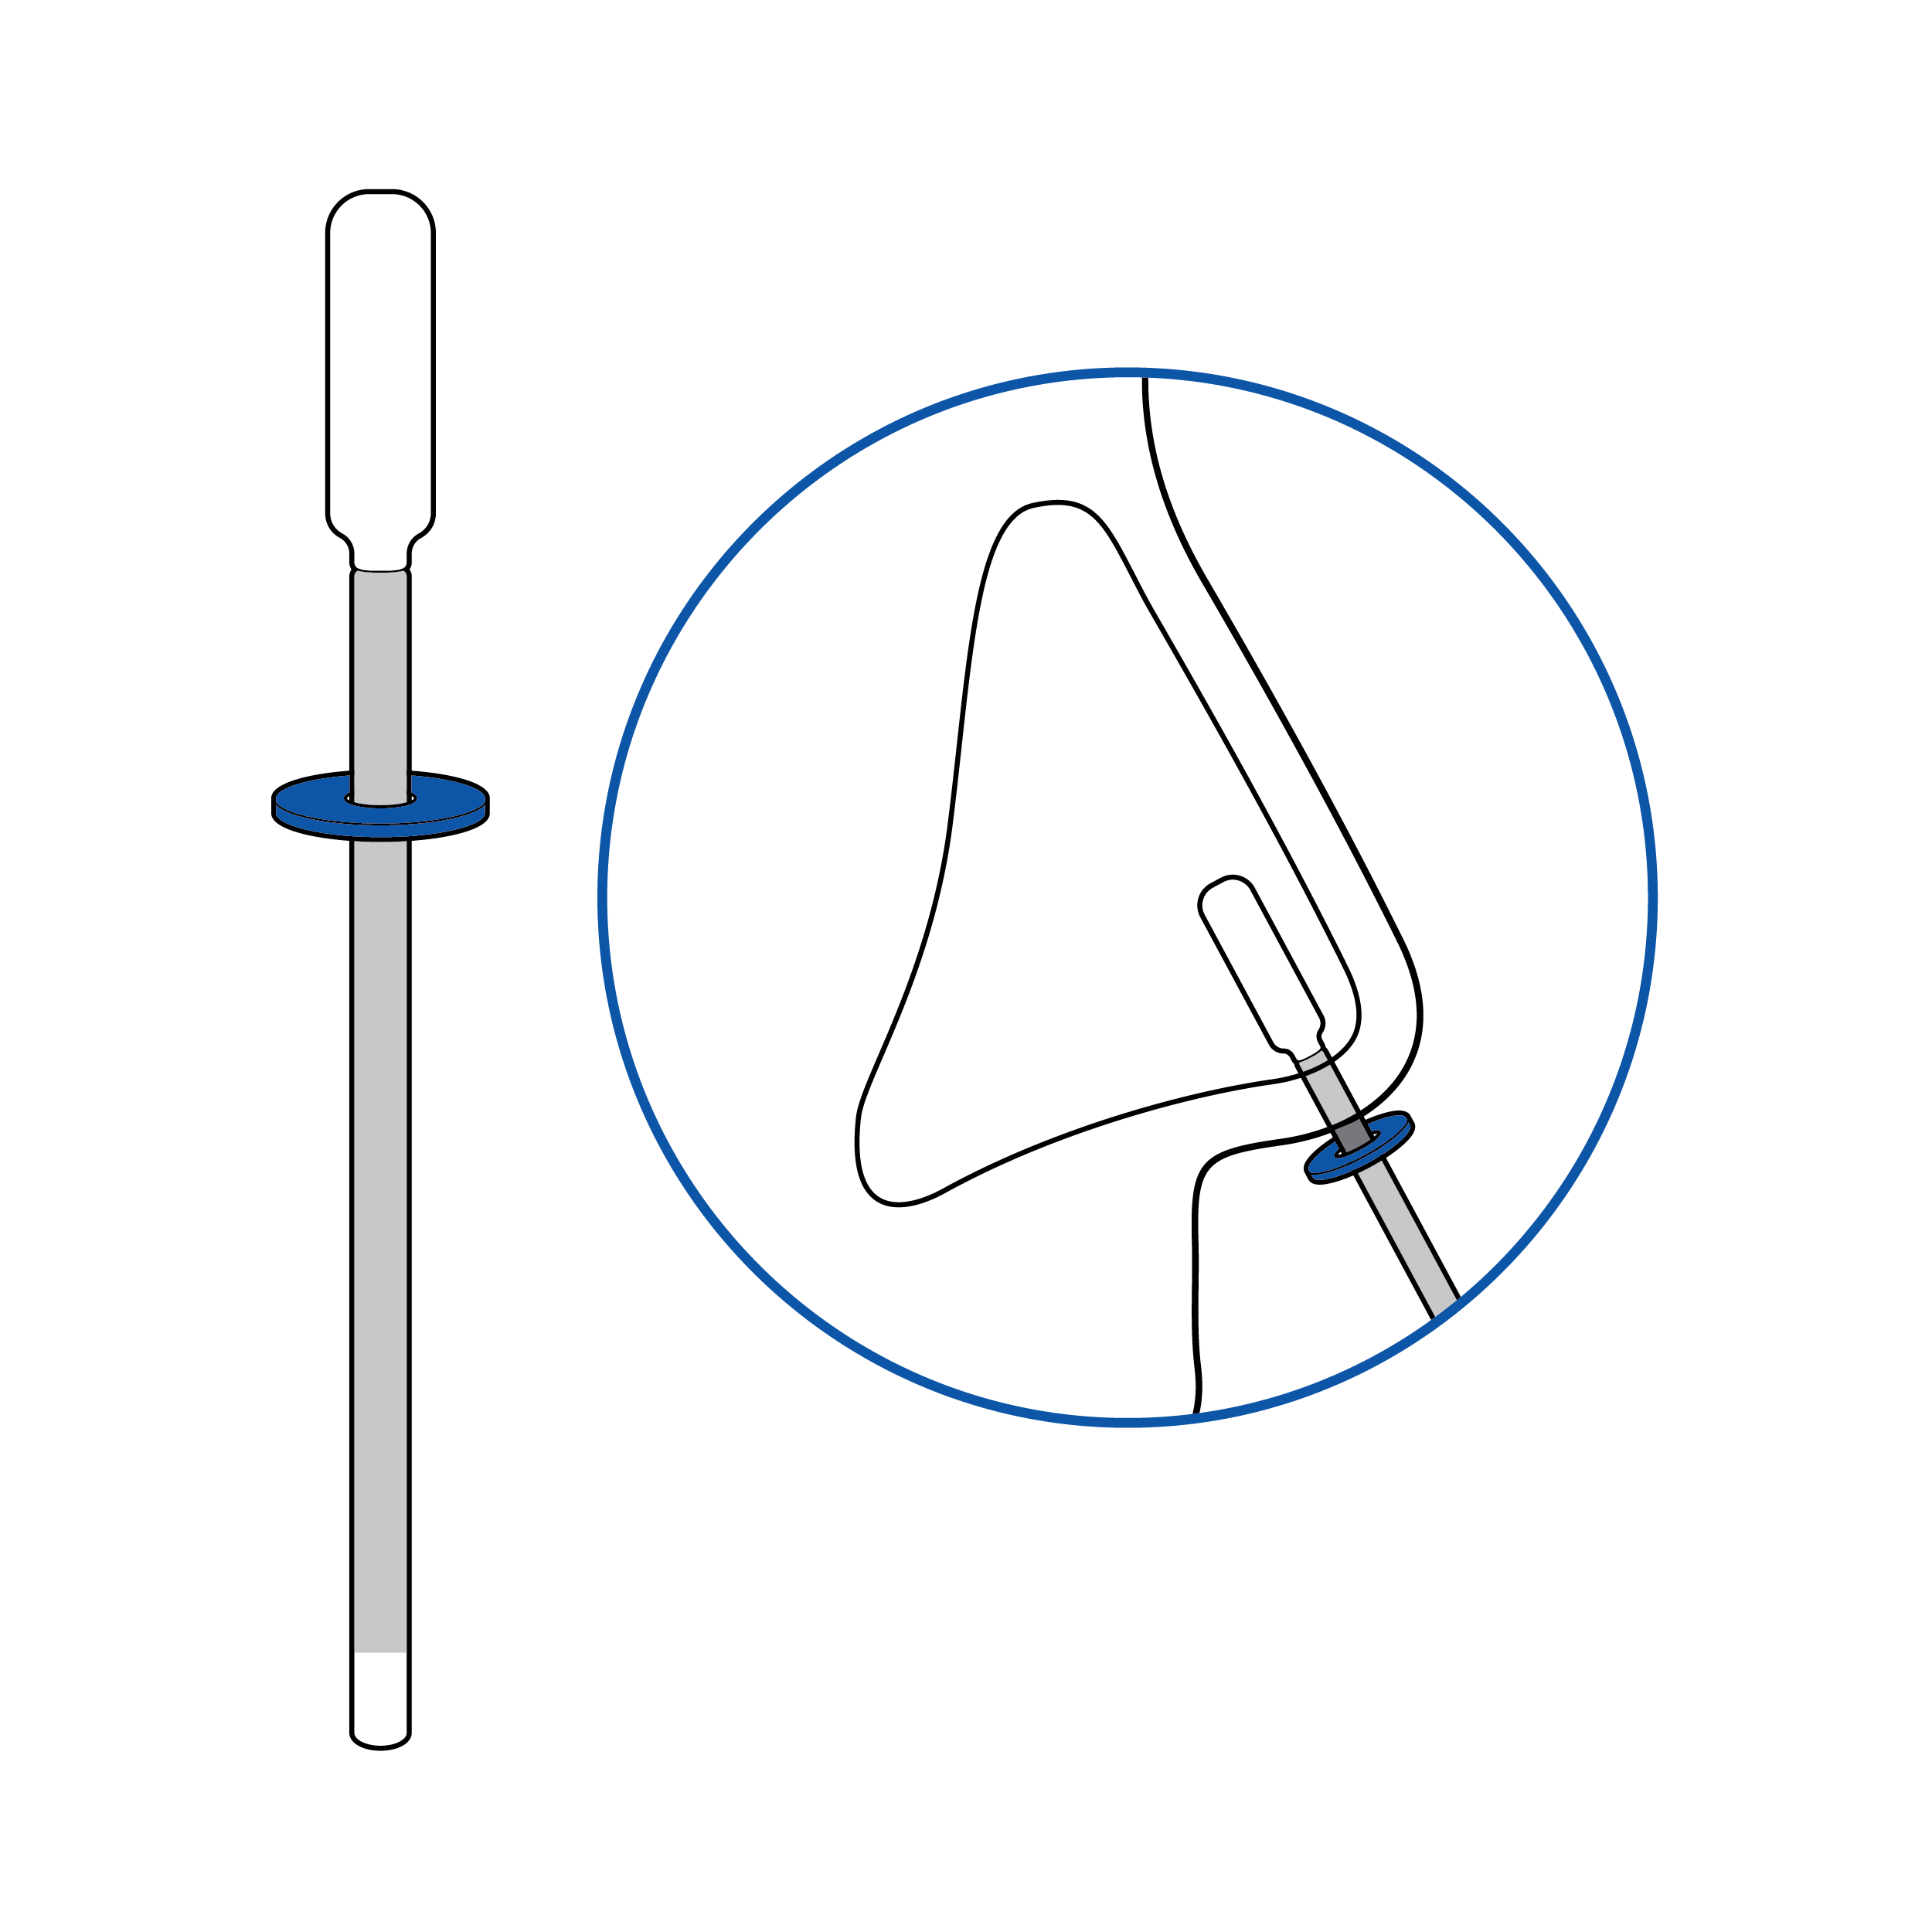 Swab with soft tip, narrow shaft, and raised ring feature on the shaft. A side view of a nose with the swab inserted up to the raised ring into the nasal passage is circled in blue, indicating the swab was inserted to a correct depth.